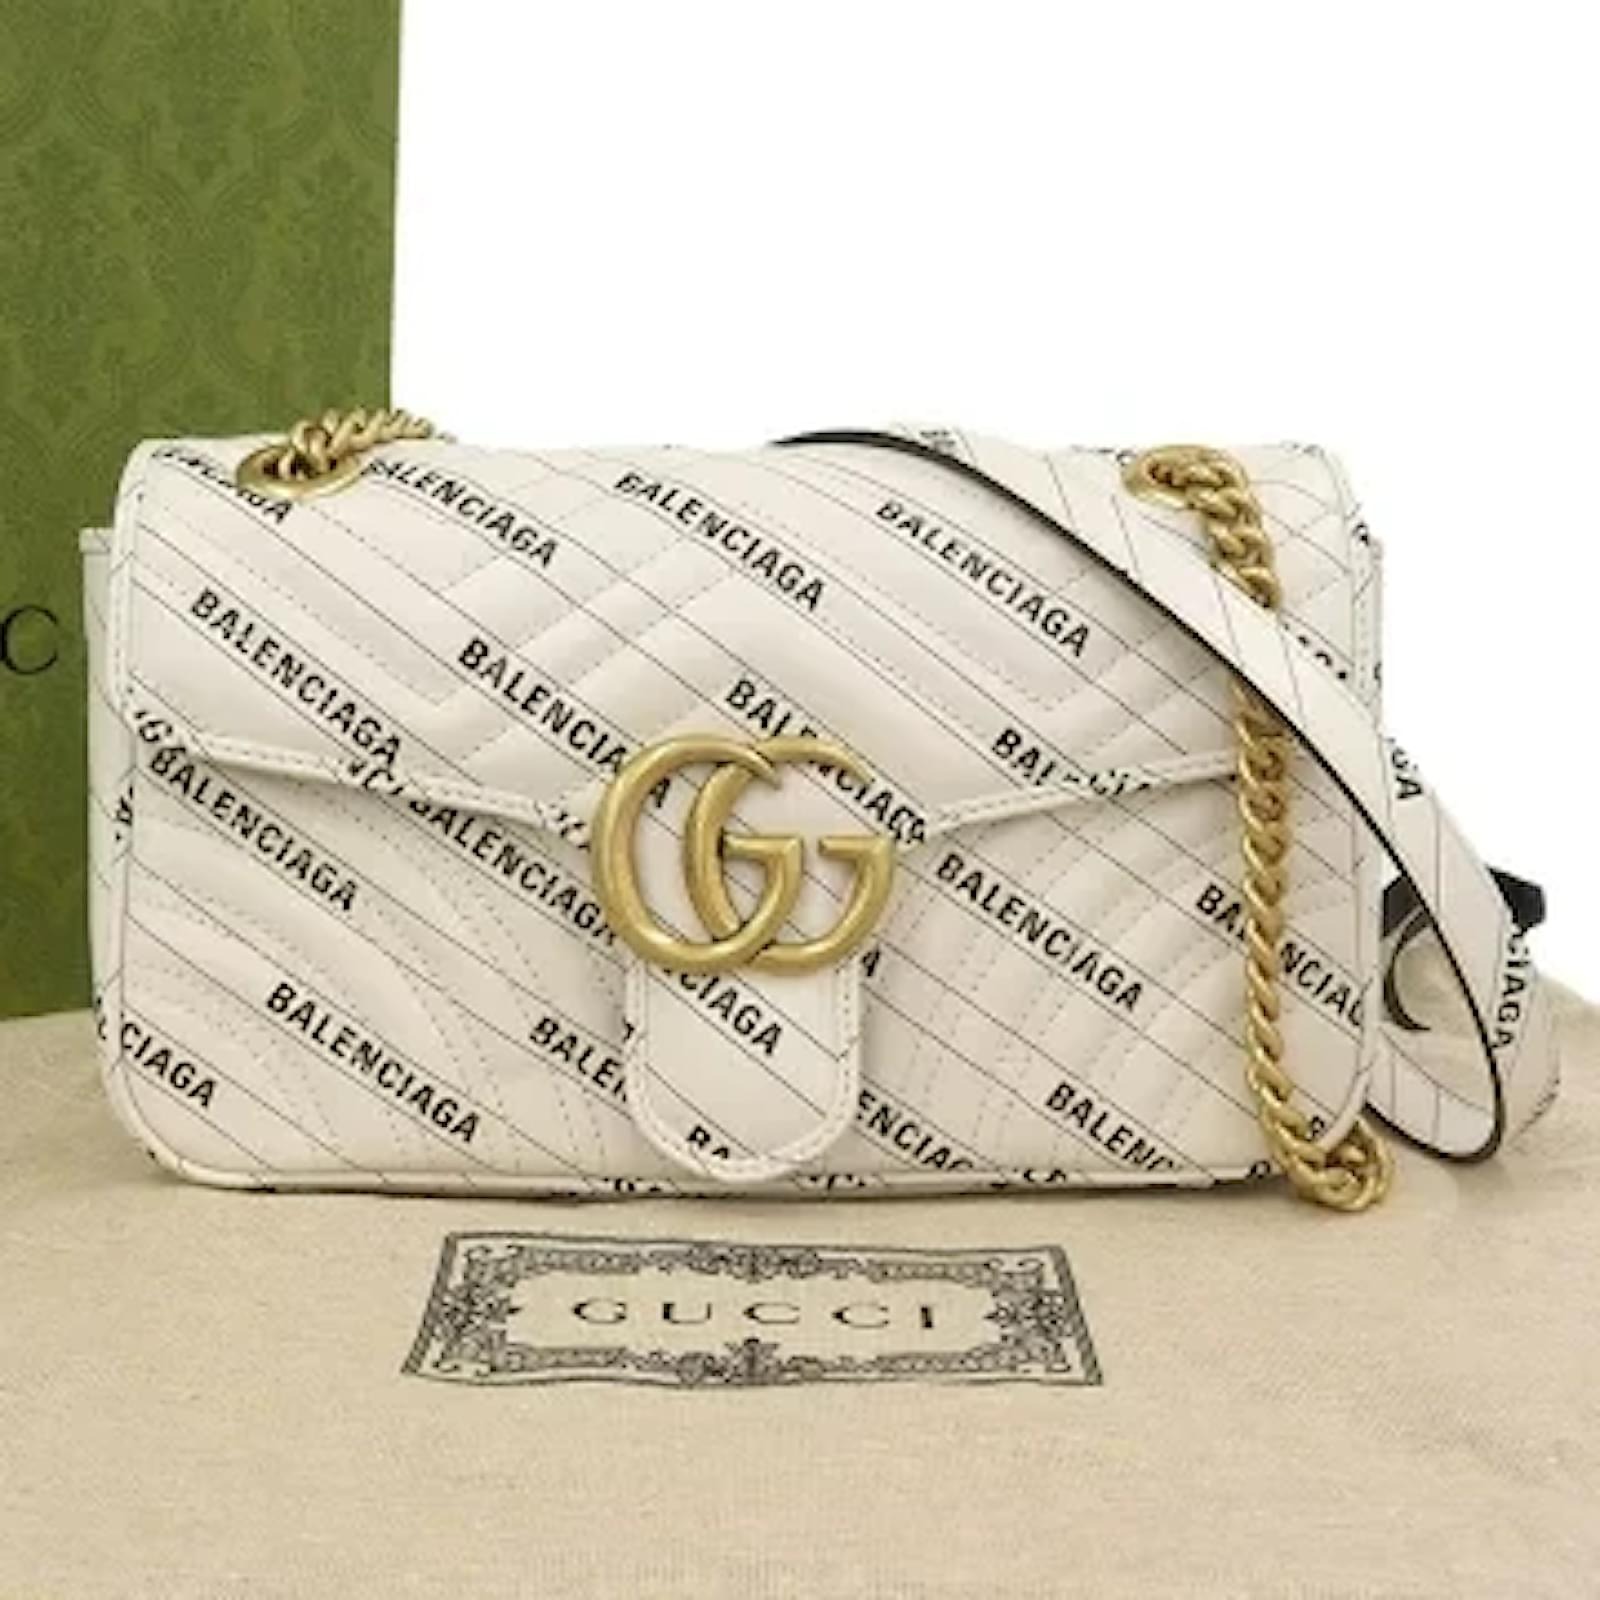 Gucci Pre-owned x Balenciaga The Hacker Project Dionysus Shoulder Bag - White